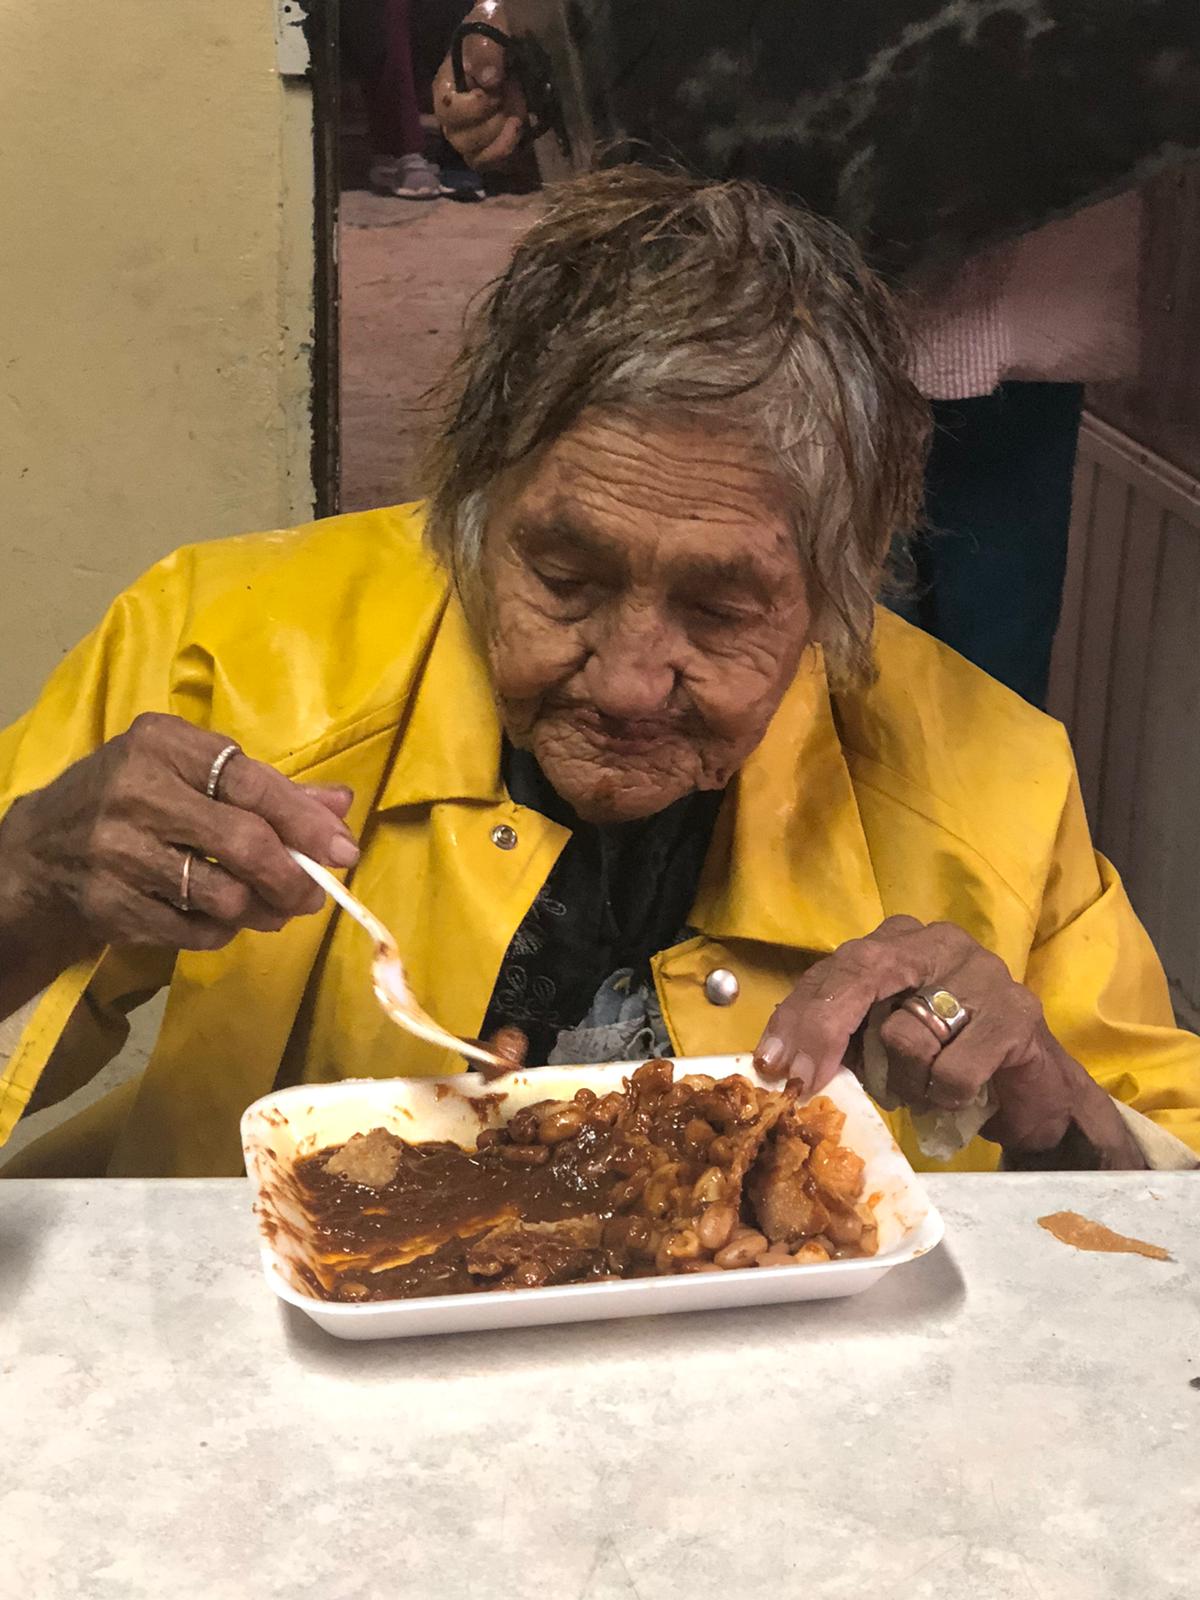 One of our elderly enjoying a hot meal at the Lord's Food Bank.